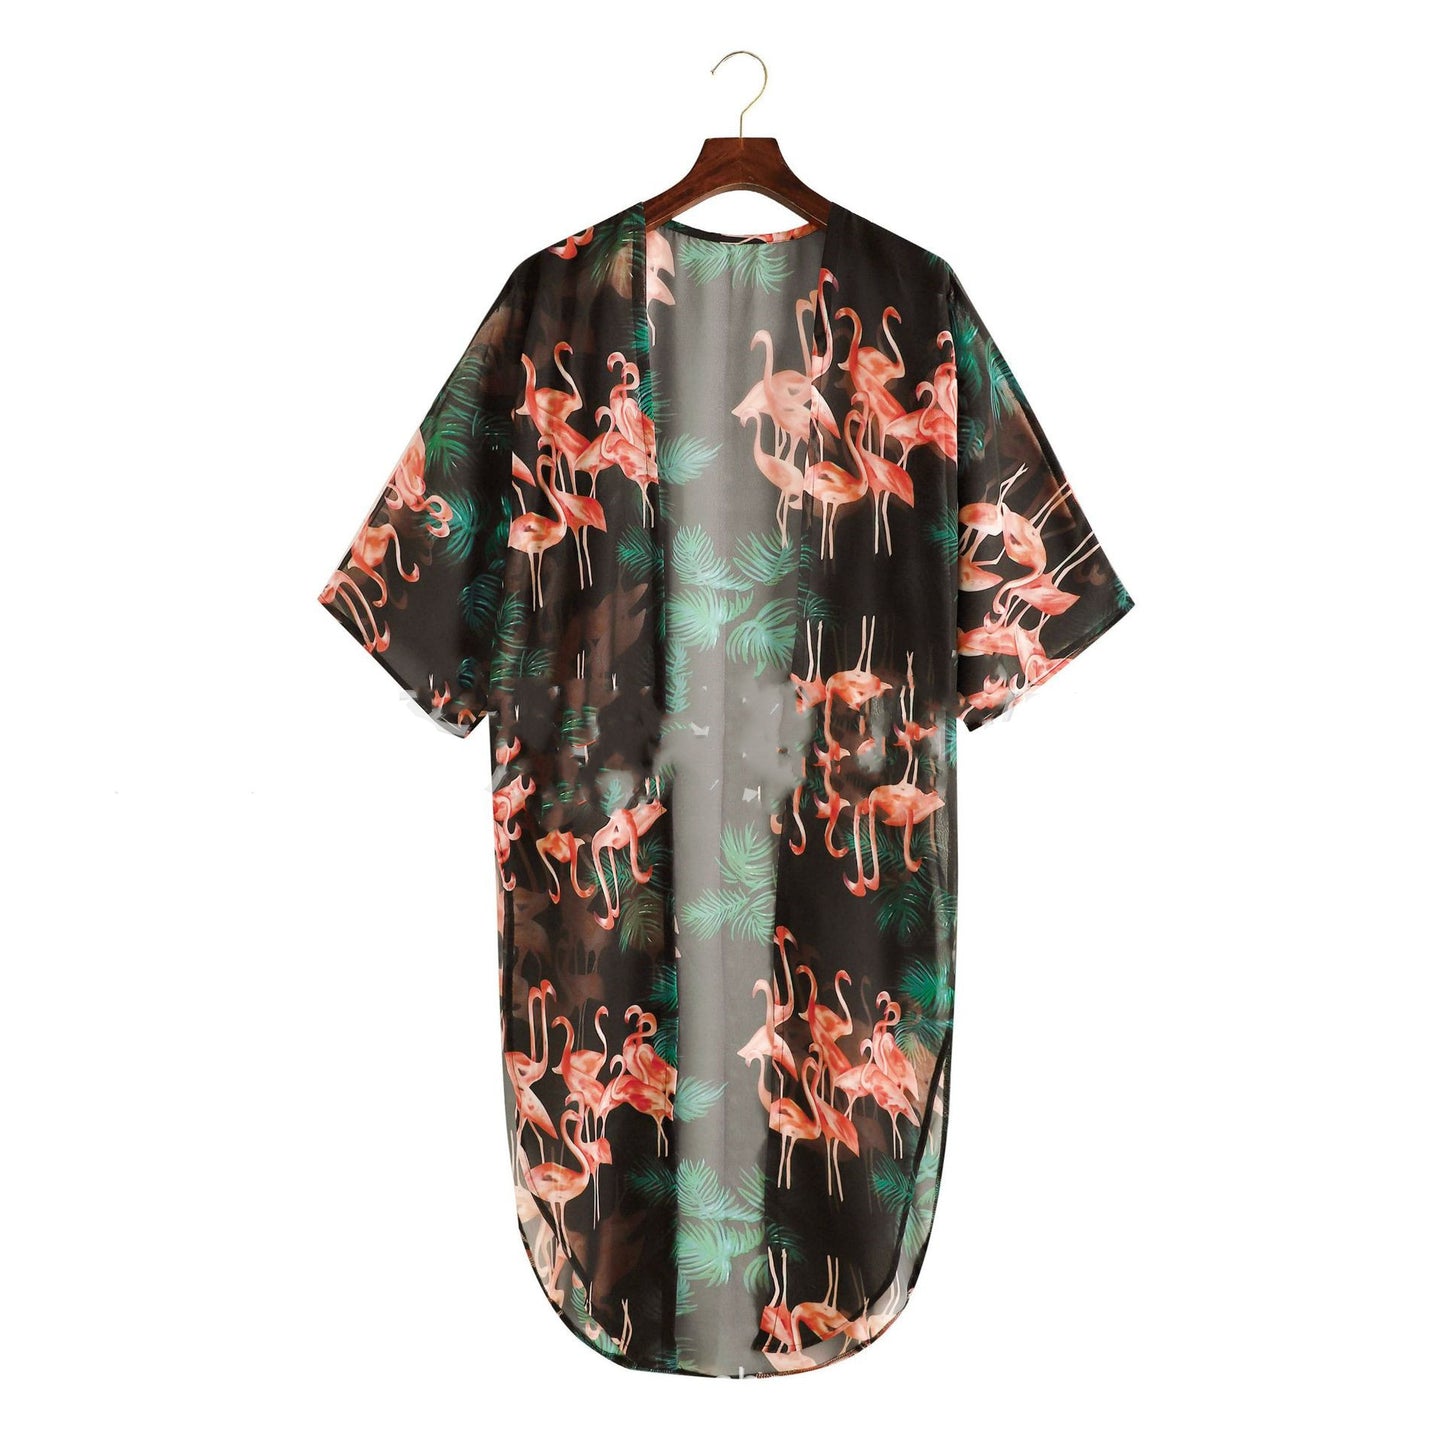 Chiffon Beach Cover-Up Shirt for Summer Seaside Vacations